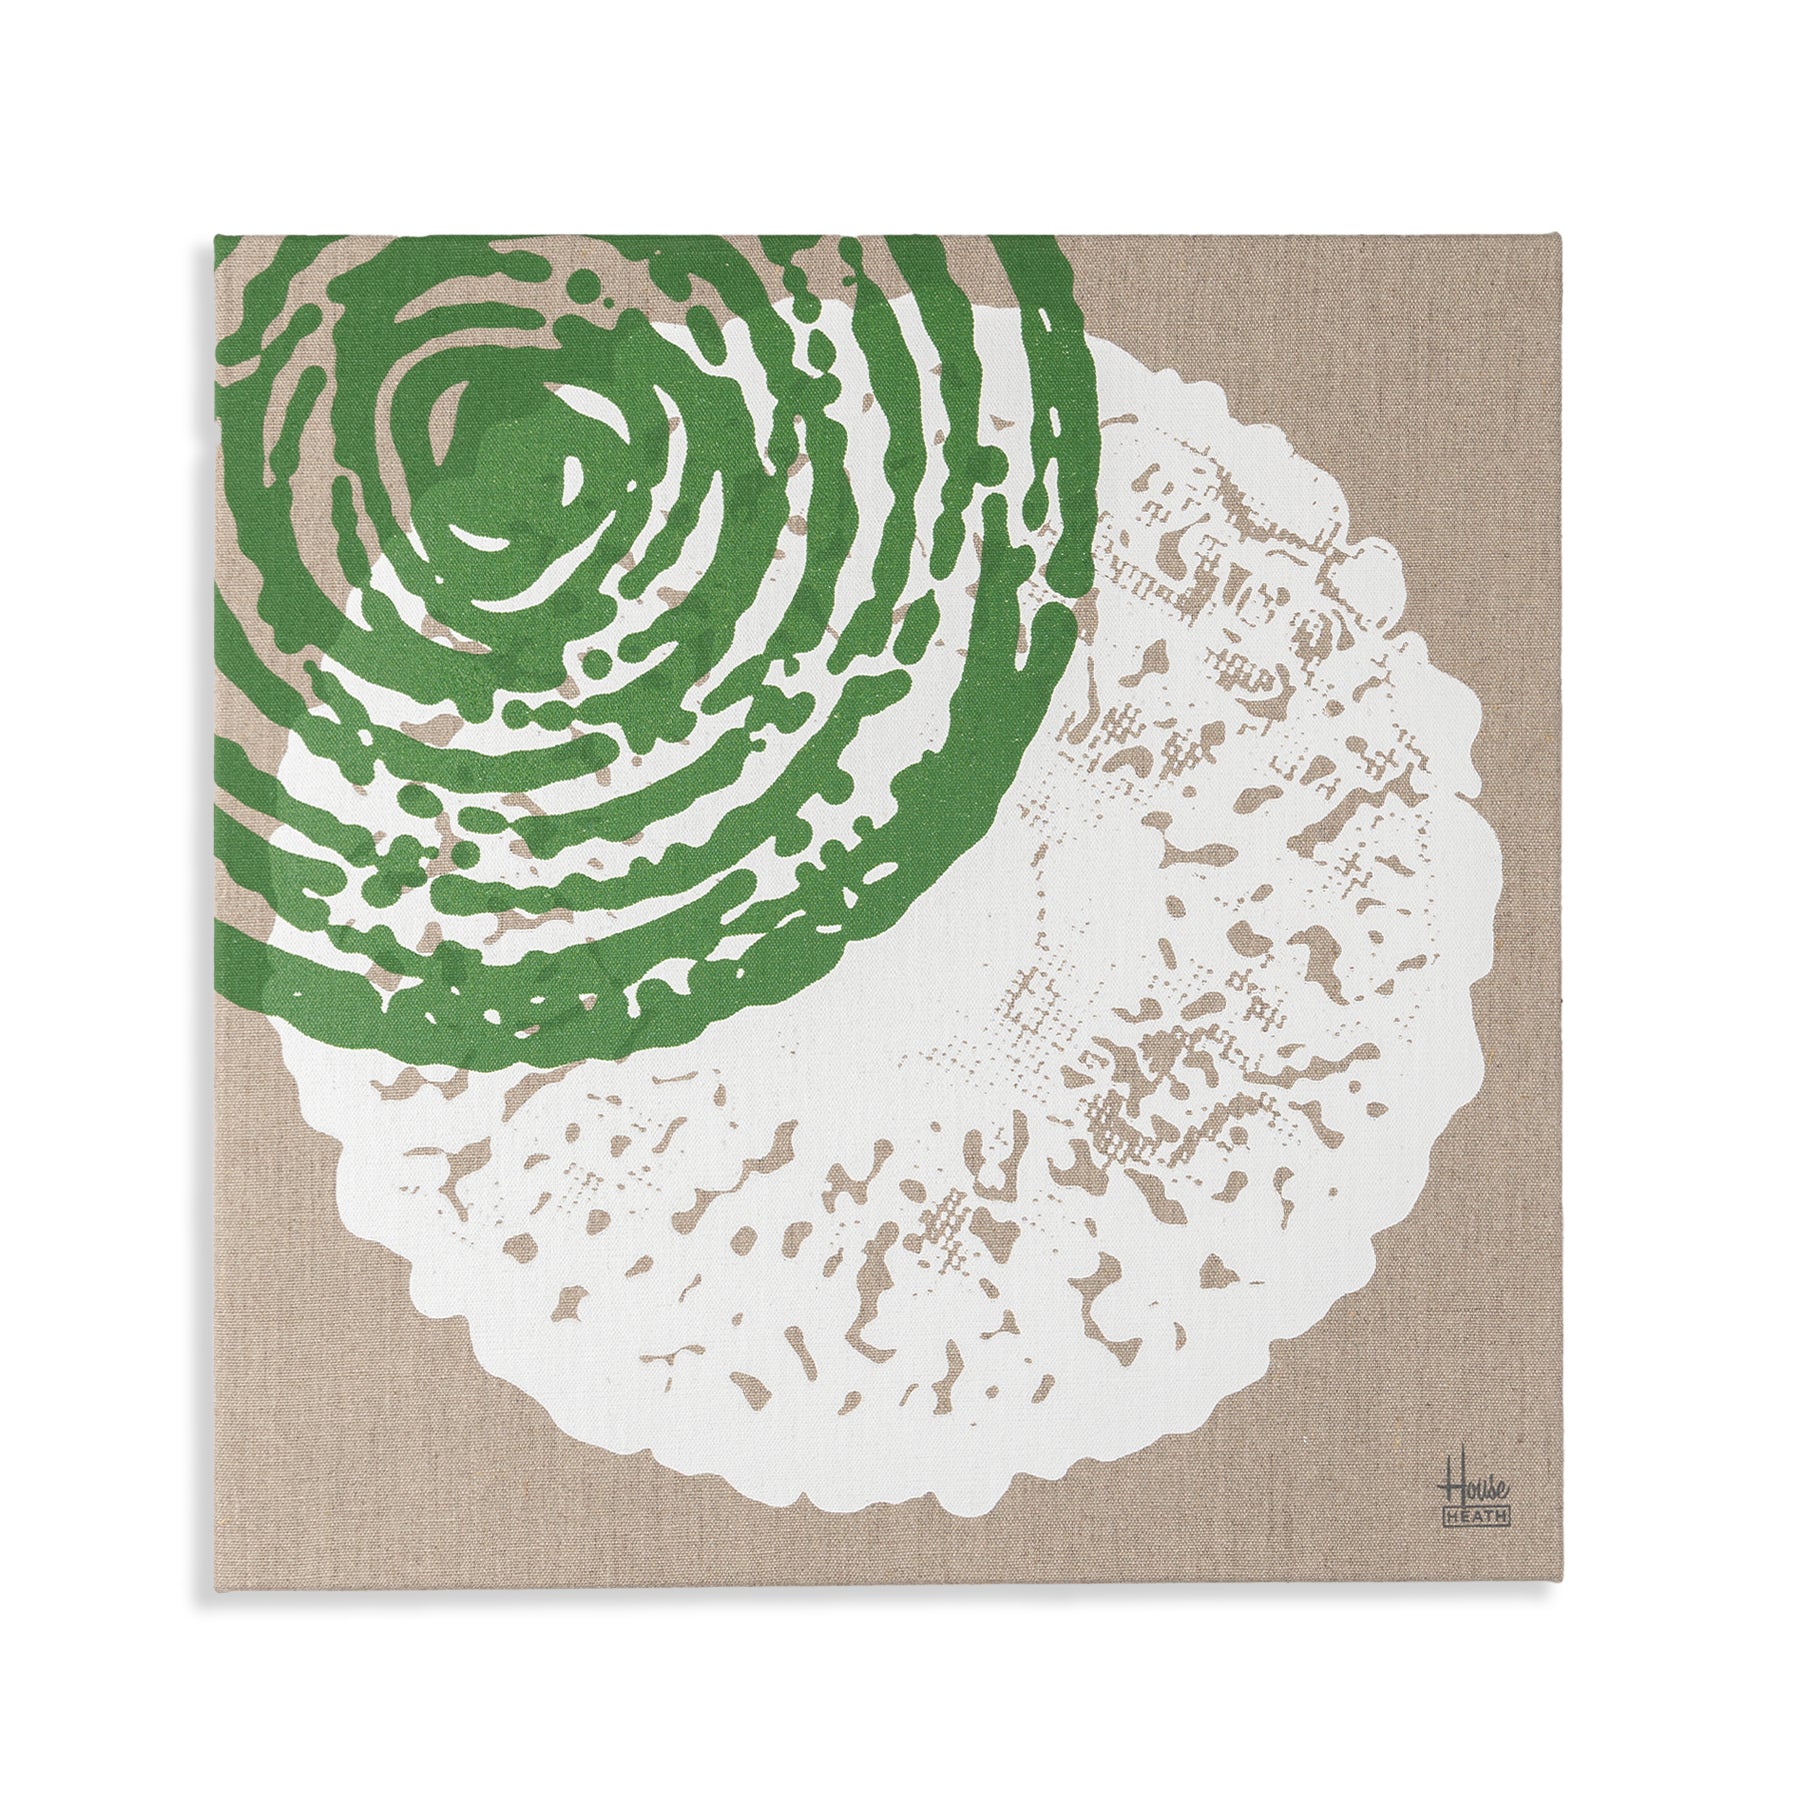 Vintage Tile Stretched Canvas Print in Evergreen and White Zoom Image 1